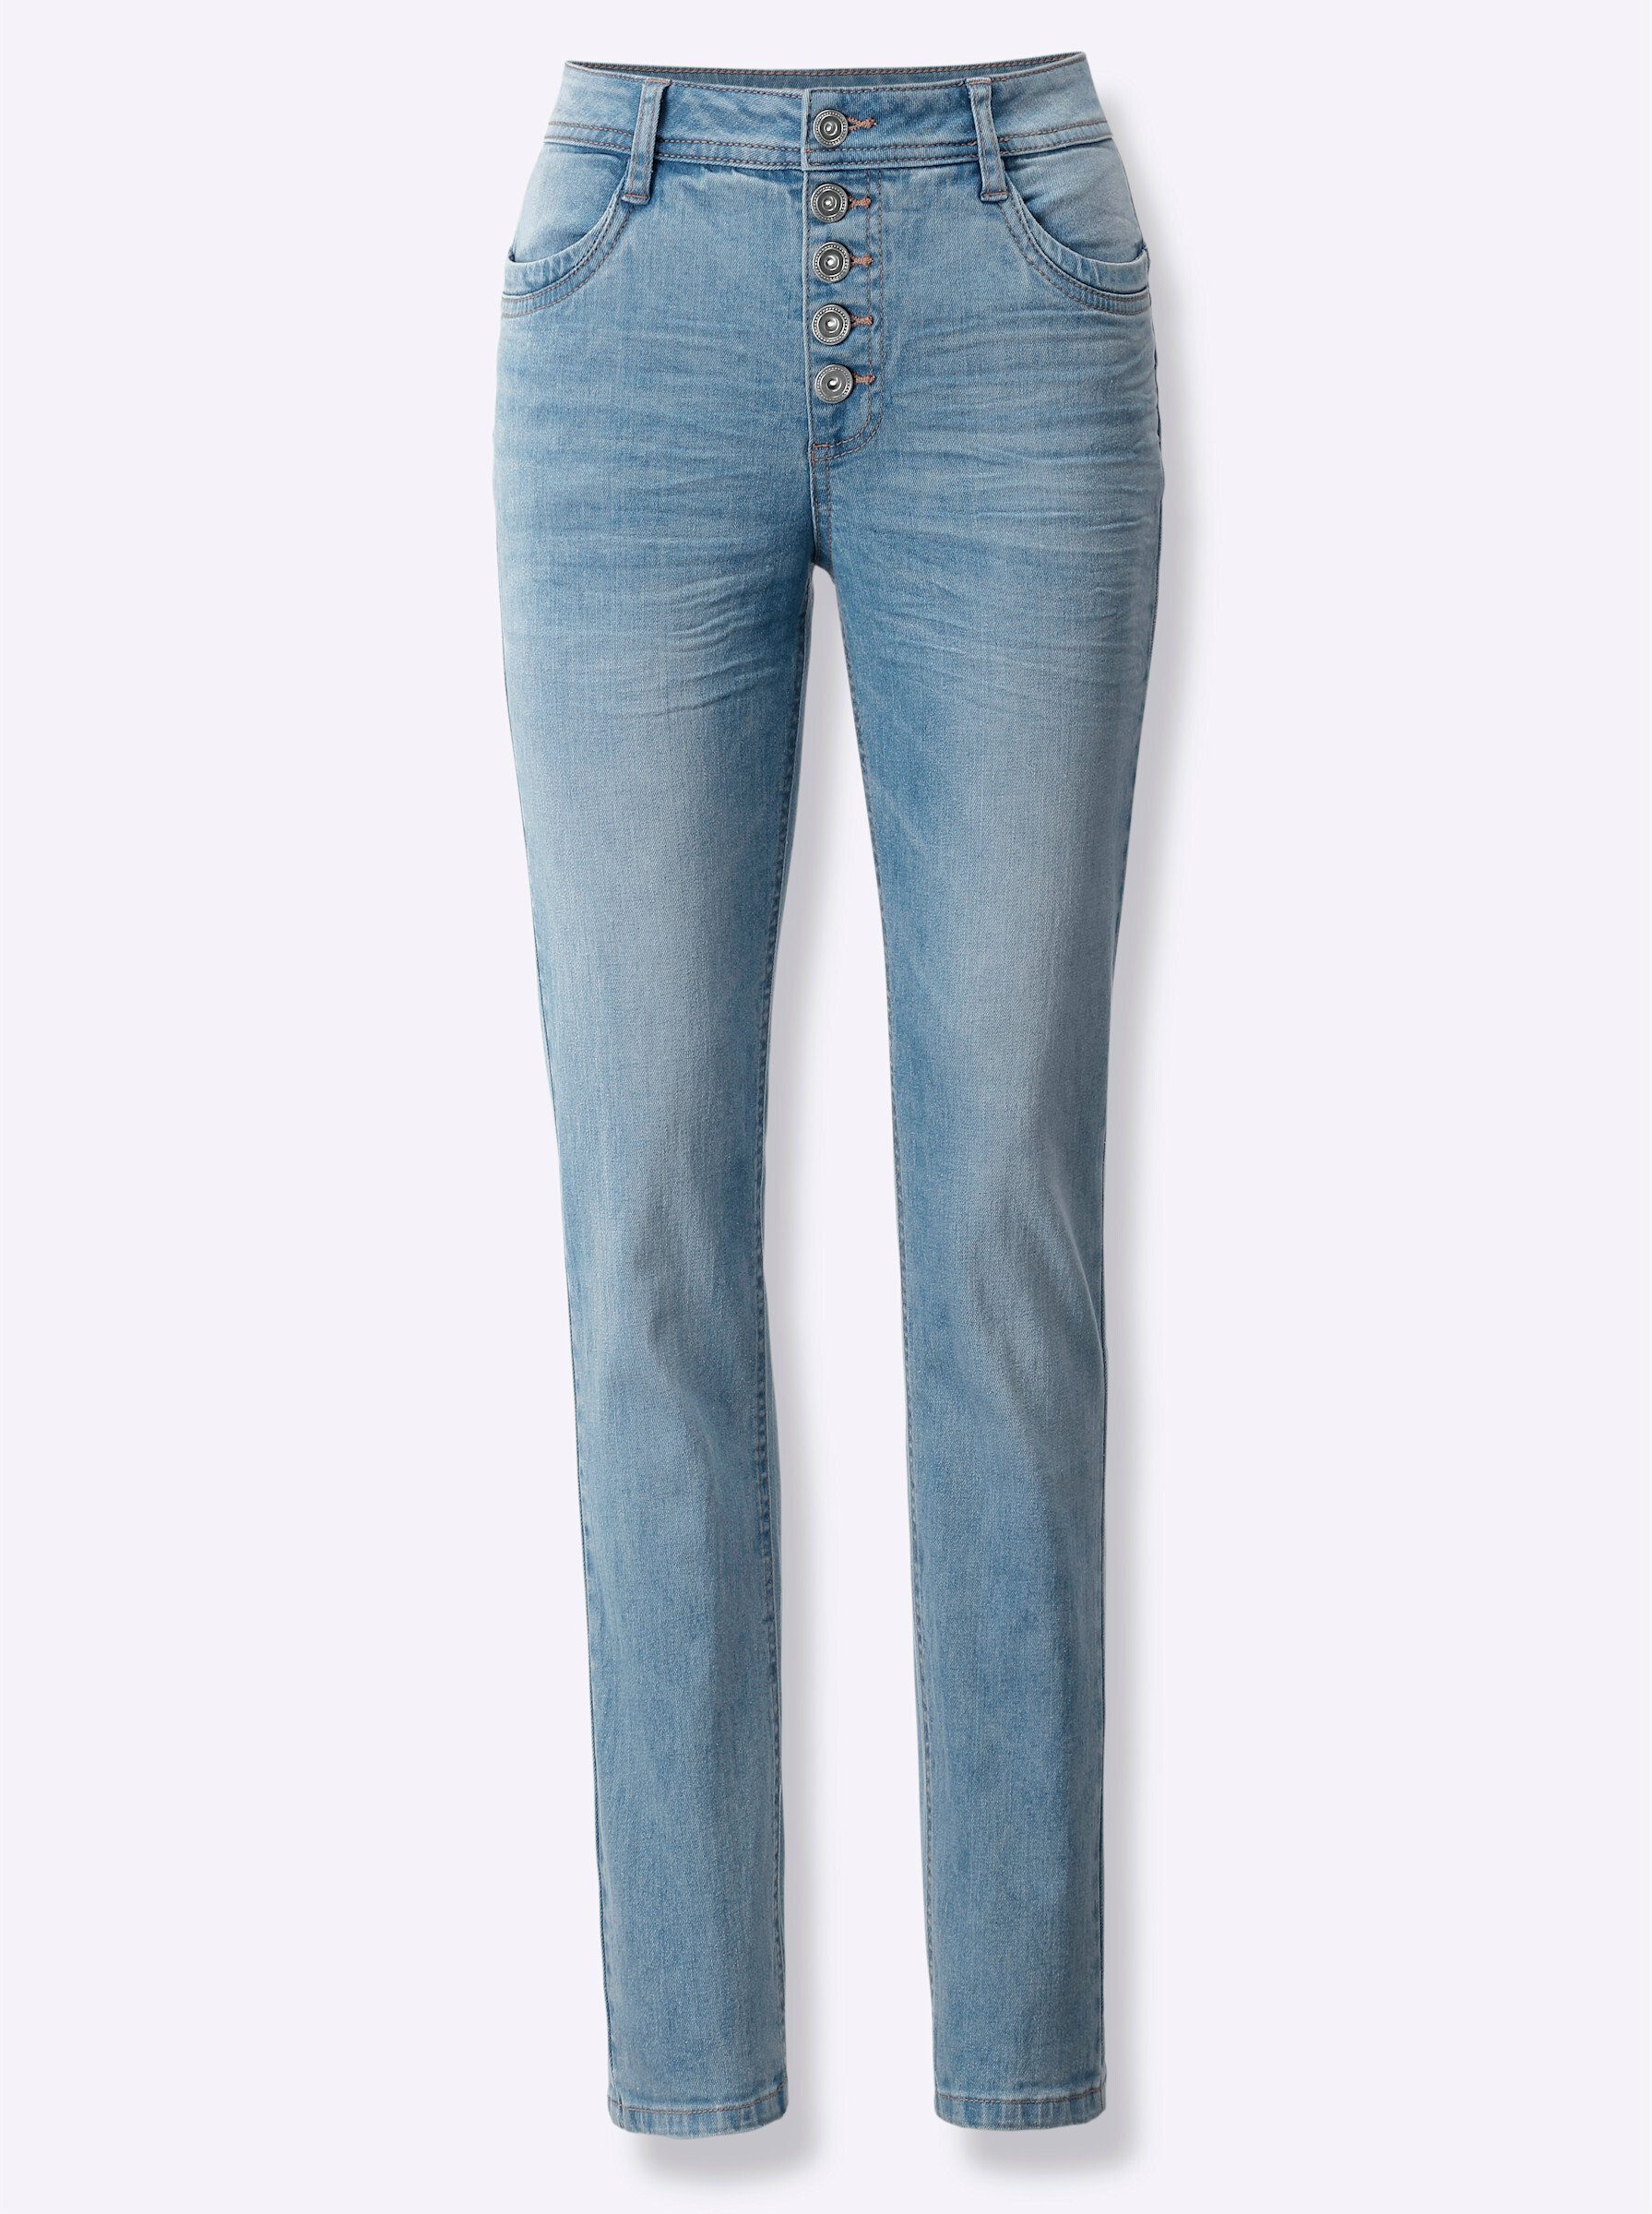 heine Bequeme Jeans blue-bleached | Jeans